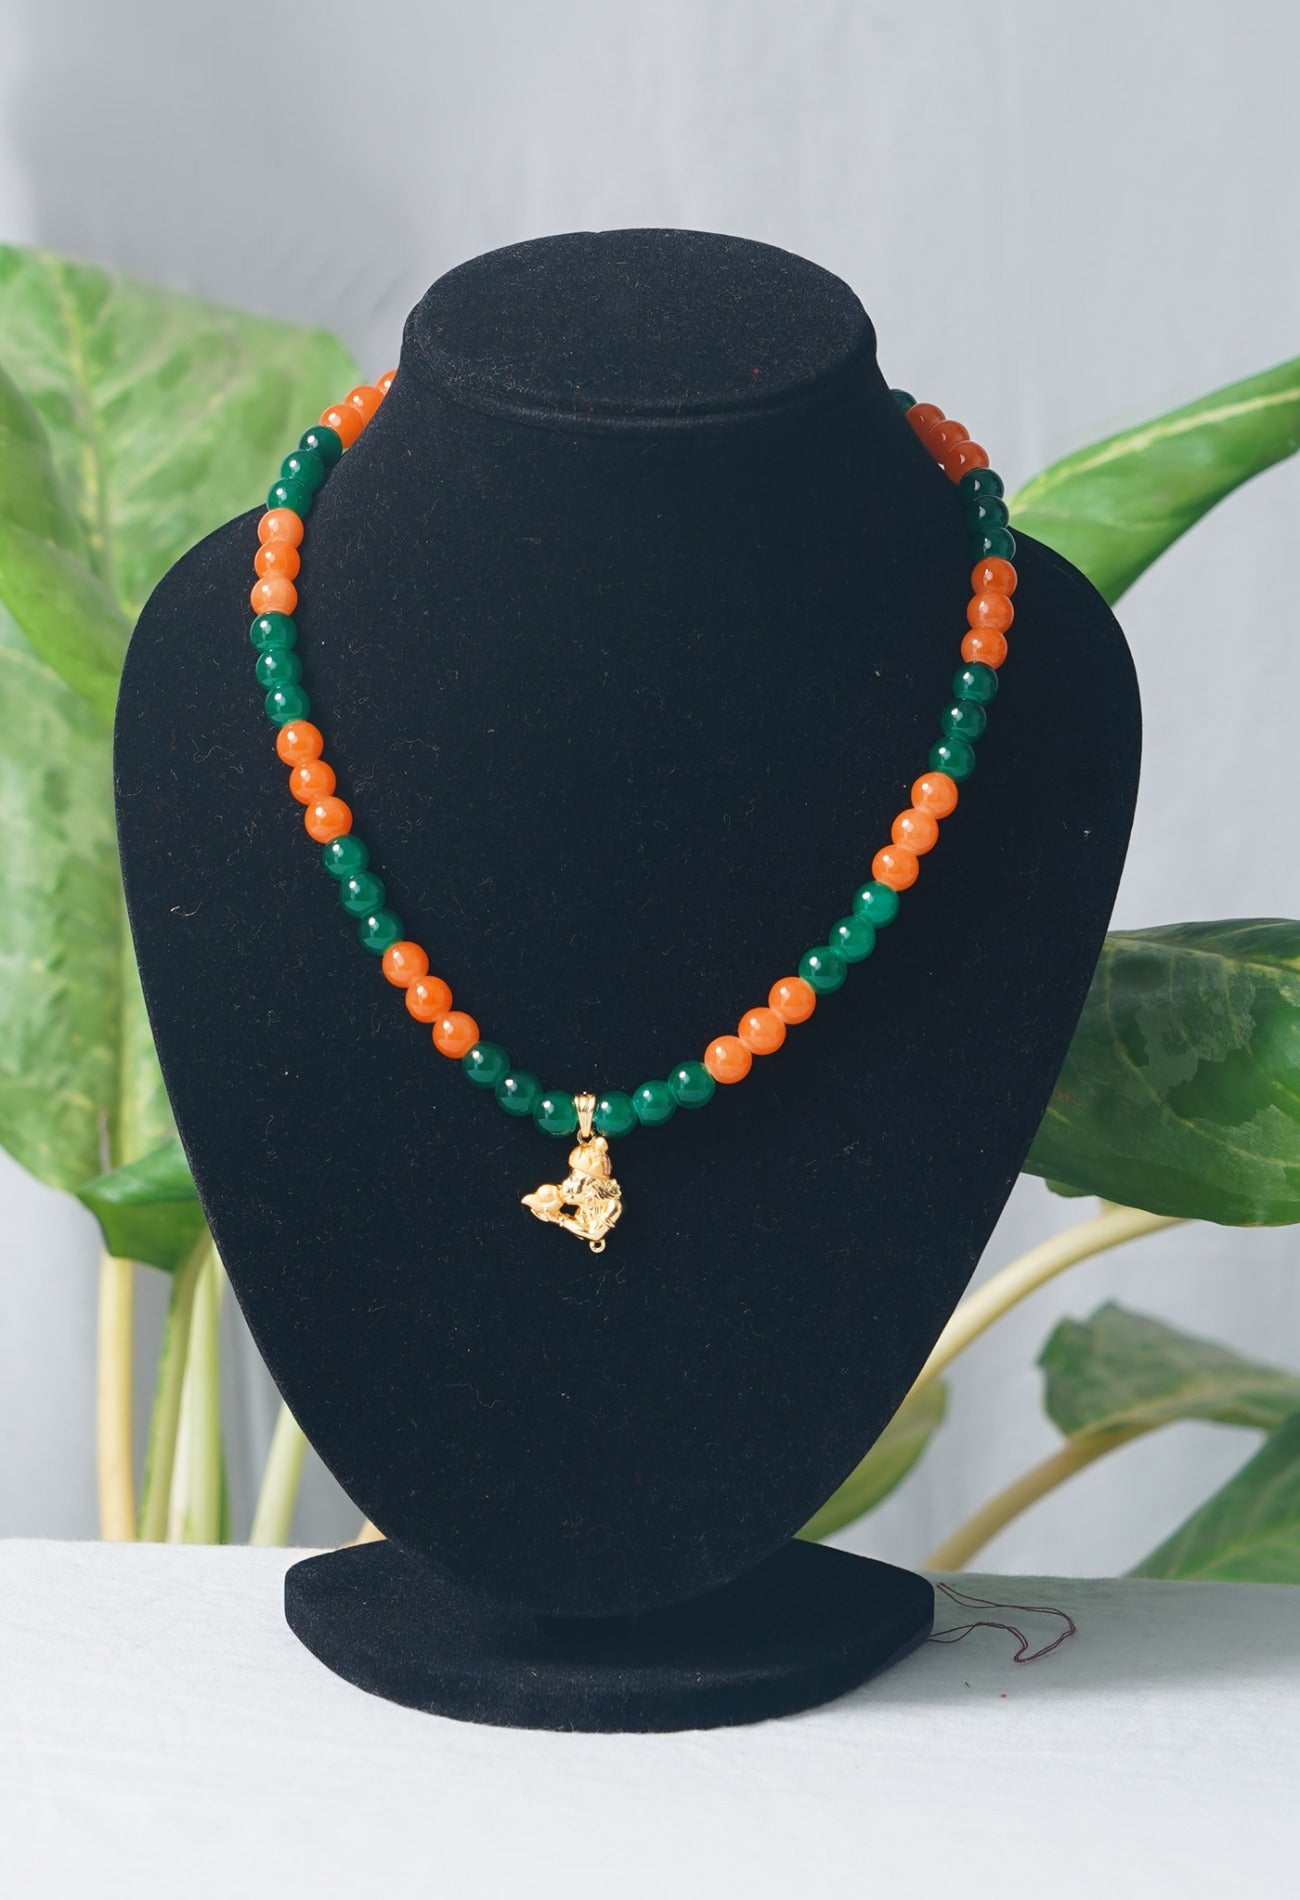 Online Shopping for Green and Orange Amravati Round Beads Necklace with Pendent with jewellery from Andhra pradesh at Unnatisilks.com India
